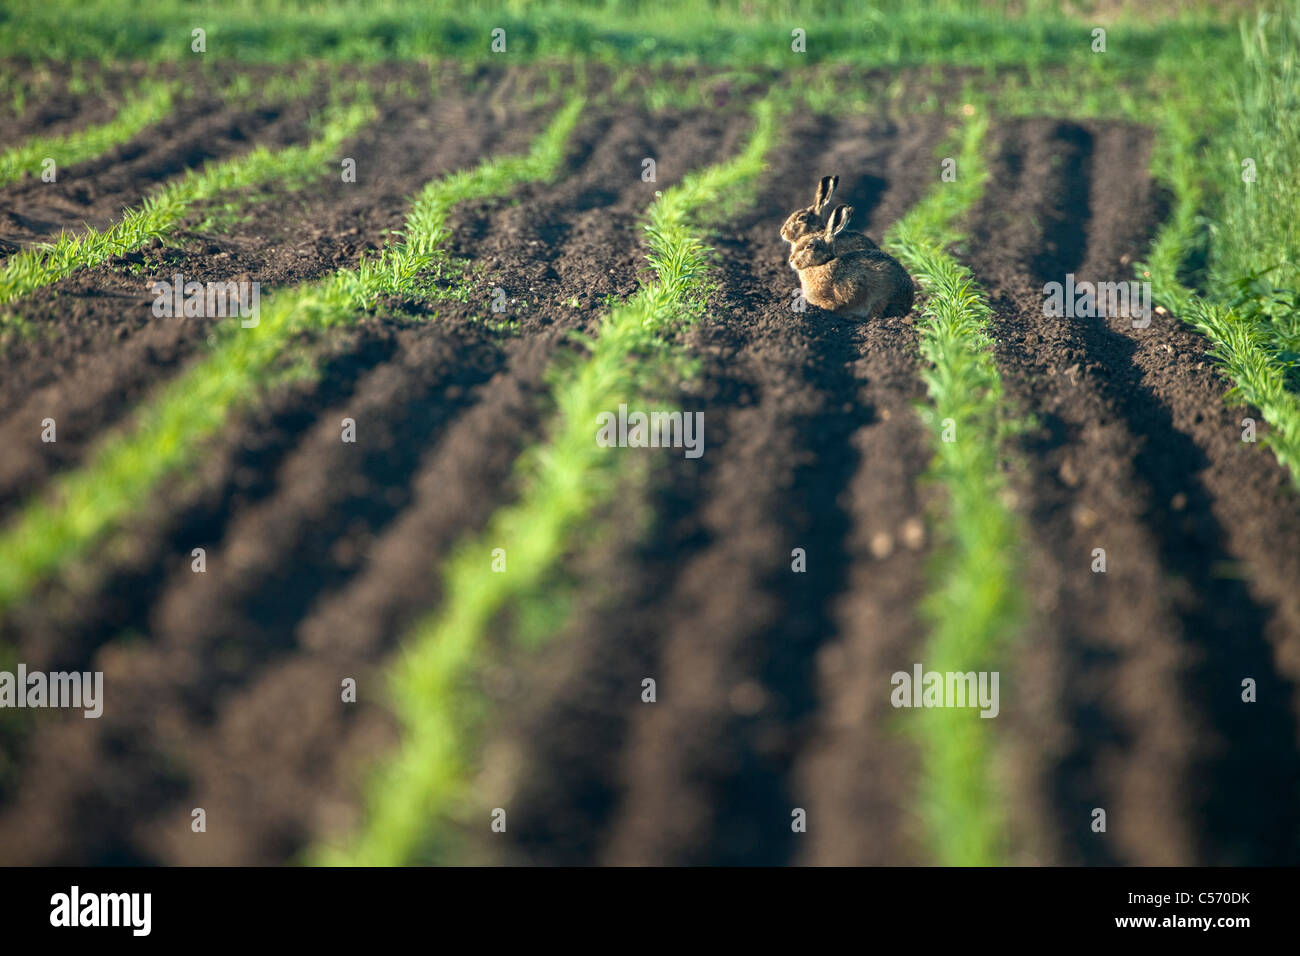 The Netherlands, 's-Graveland, Couple of rabbits warming up in morning sun in corn field. Stock Photo